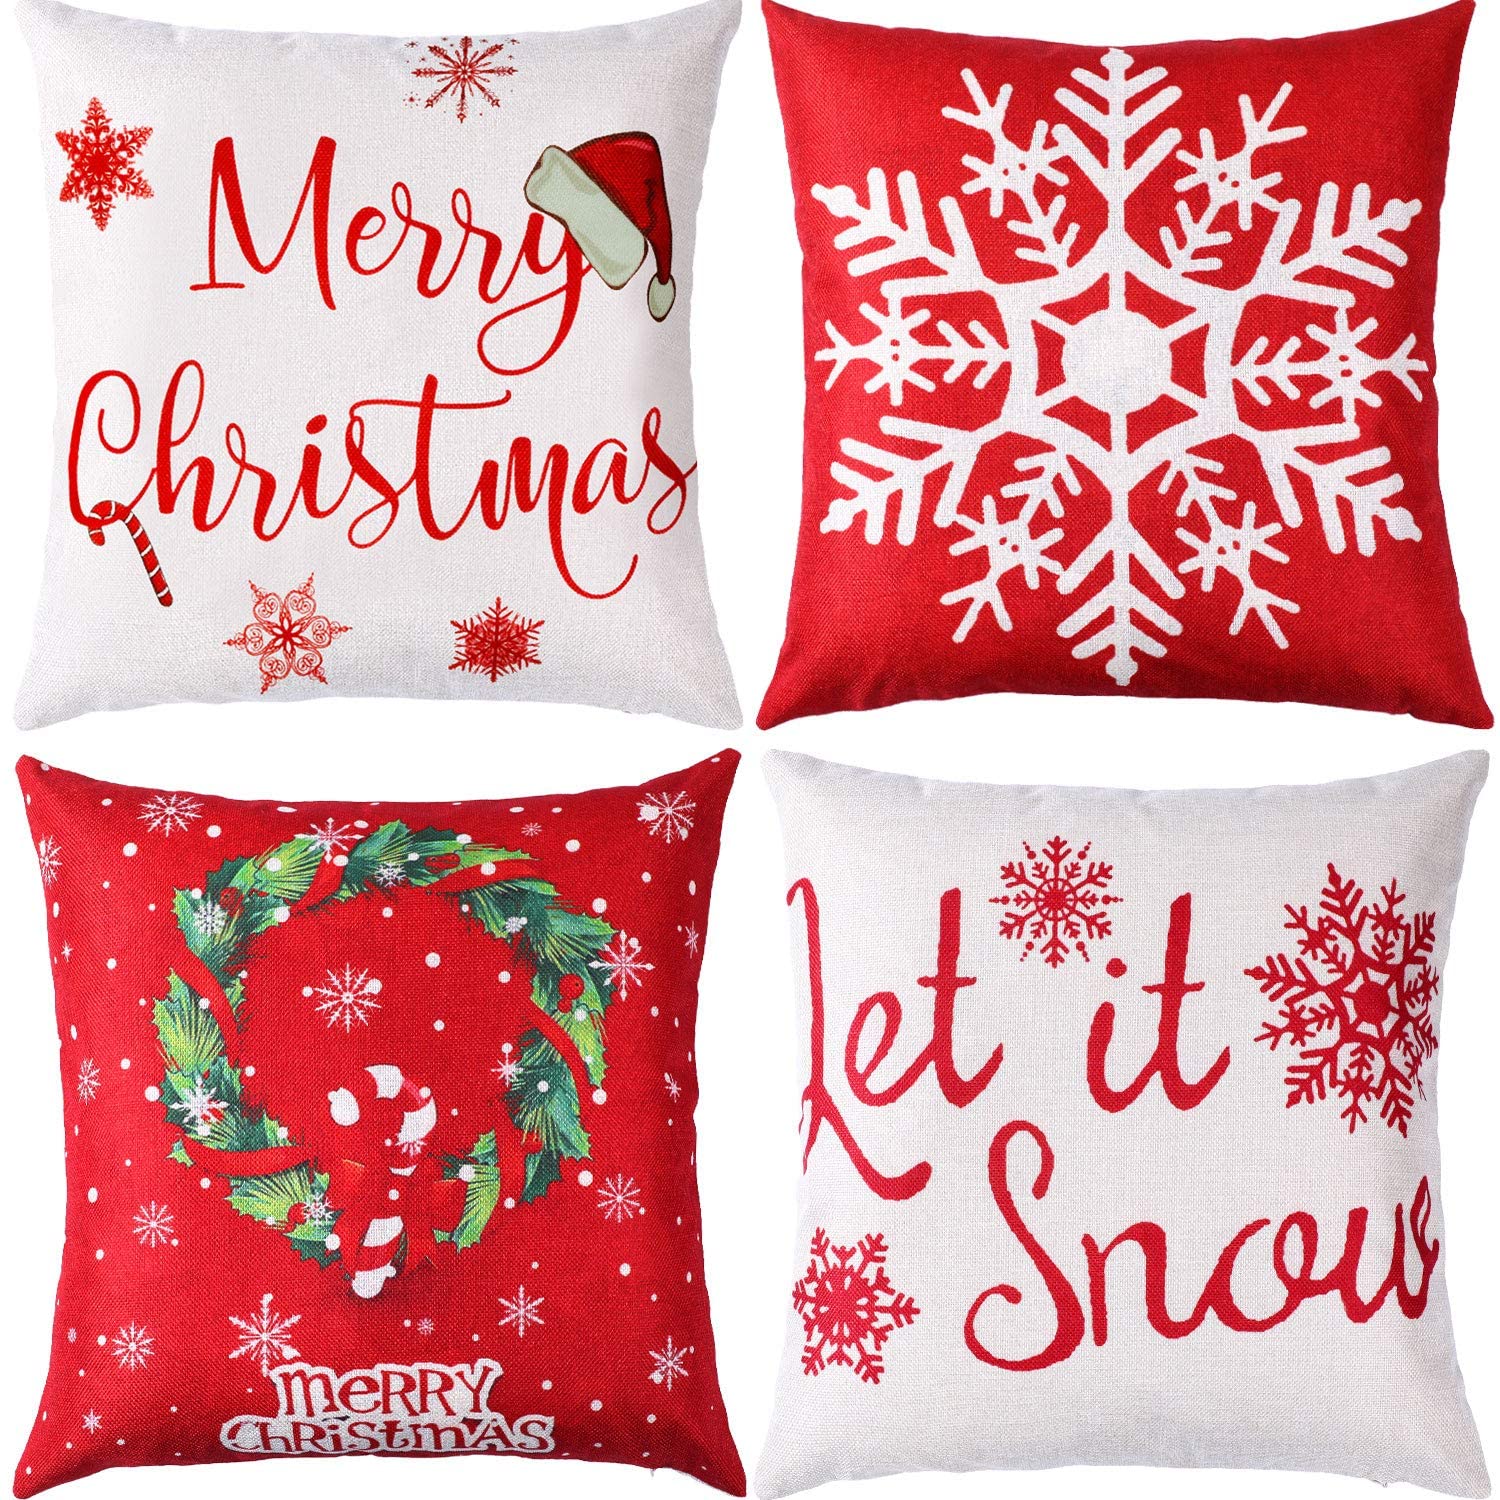 LEKAIHUAI Home Decoration Throw Pillow Covers Christmas Snowman Pillowcases Square Two Sides Print 24x24 Inches Set of 2